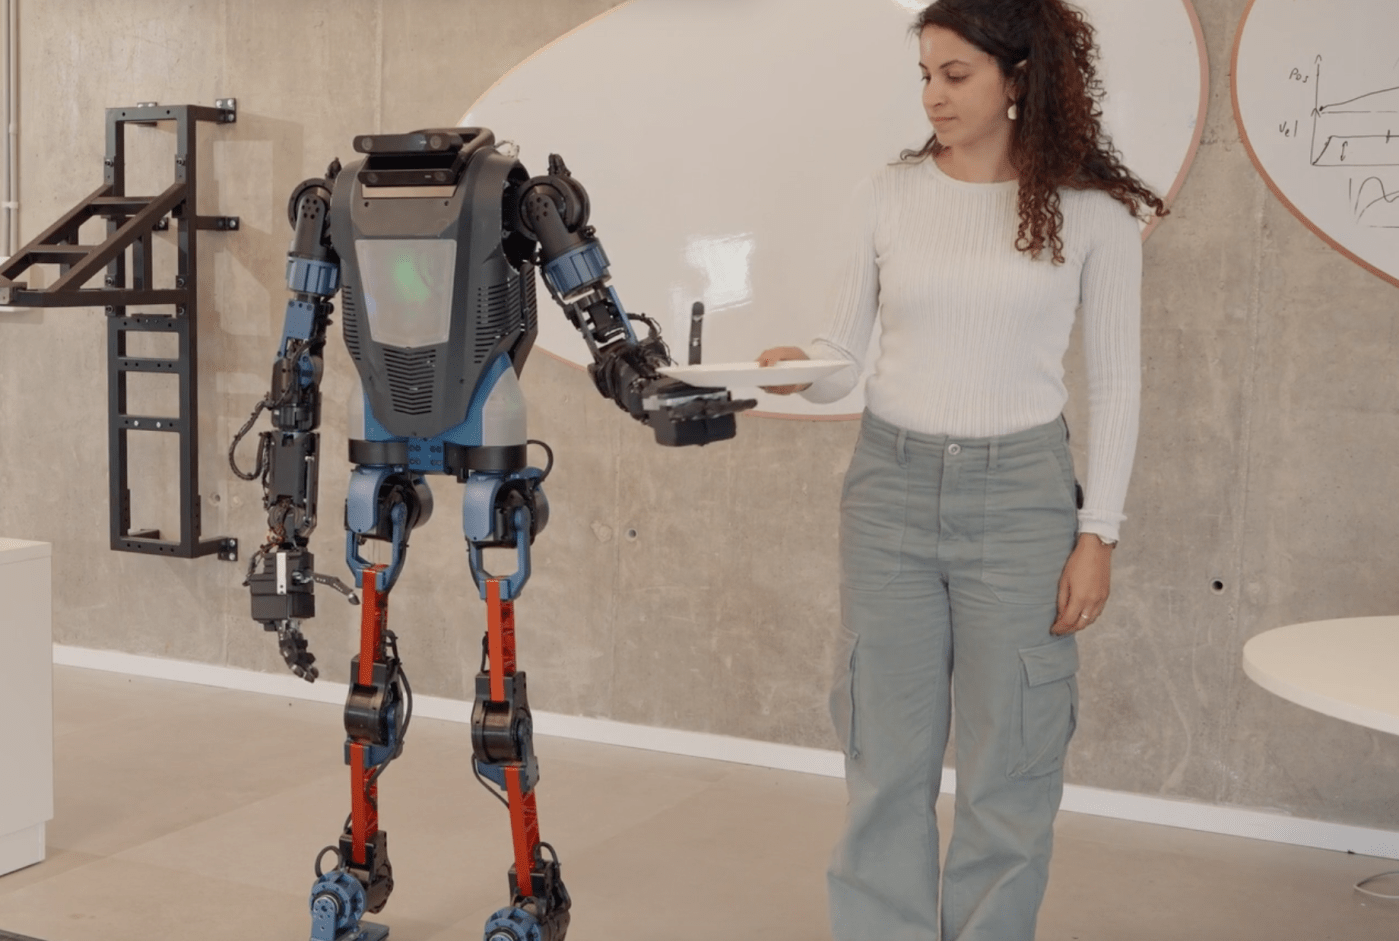 Menteebot is a human-sized AI robot that you command with natural language